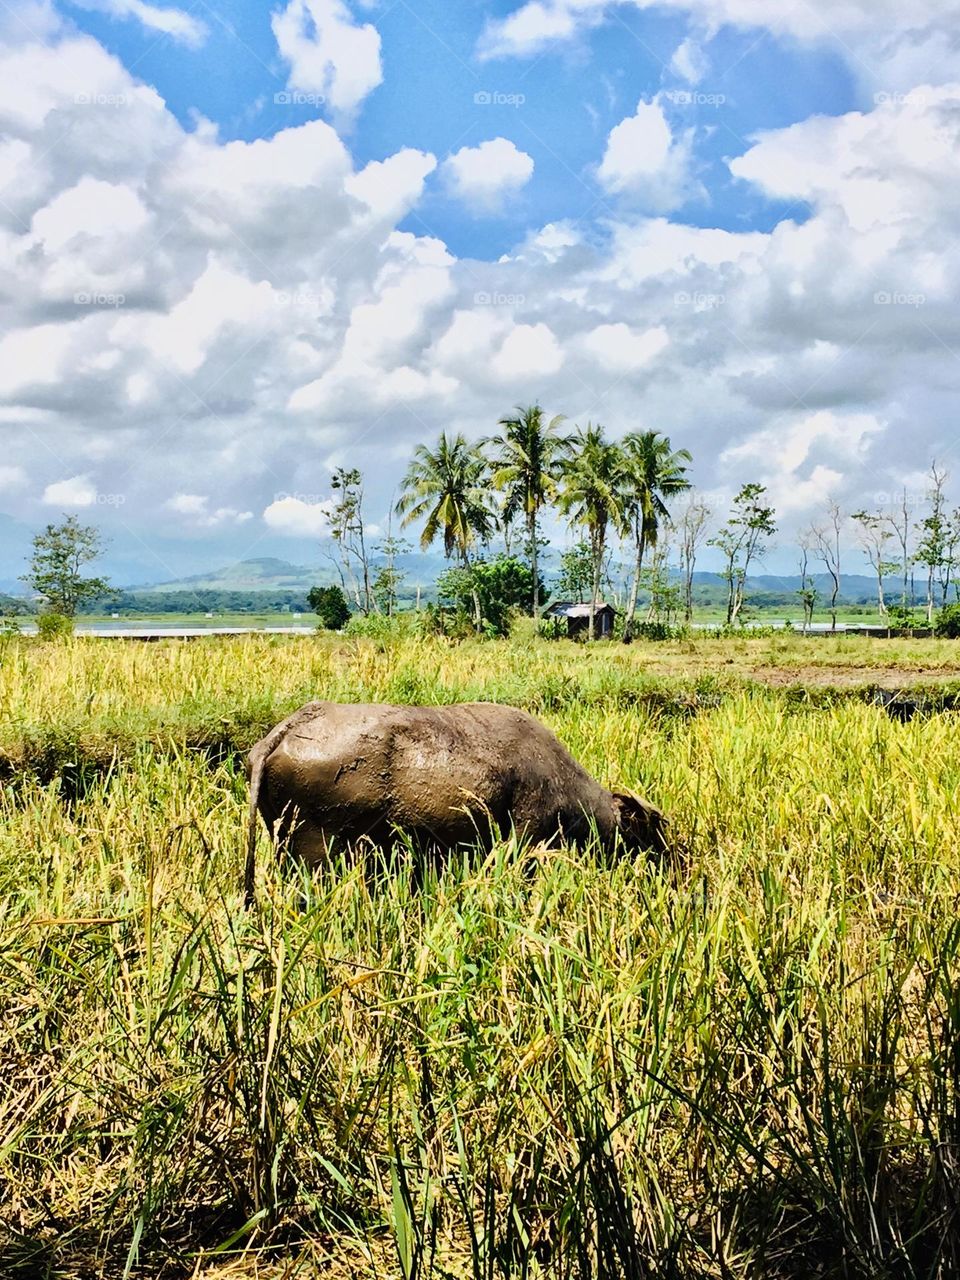 A carabao on the newly harvested rice fields 